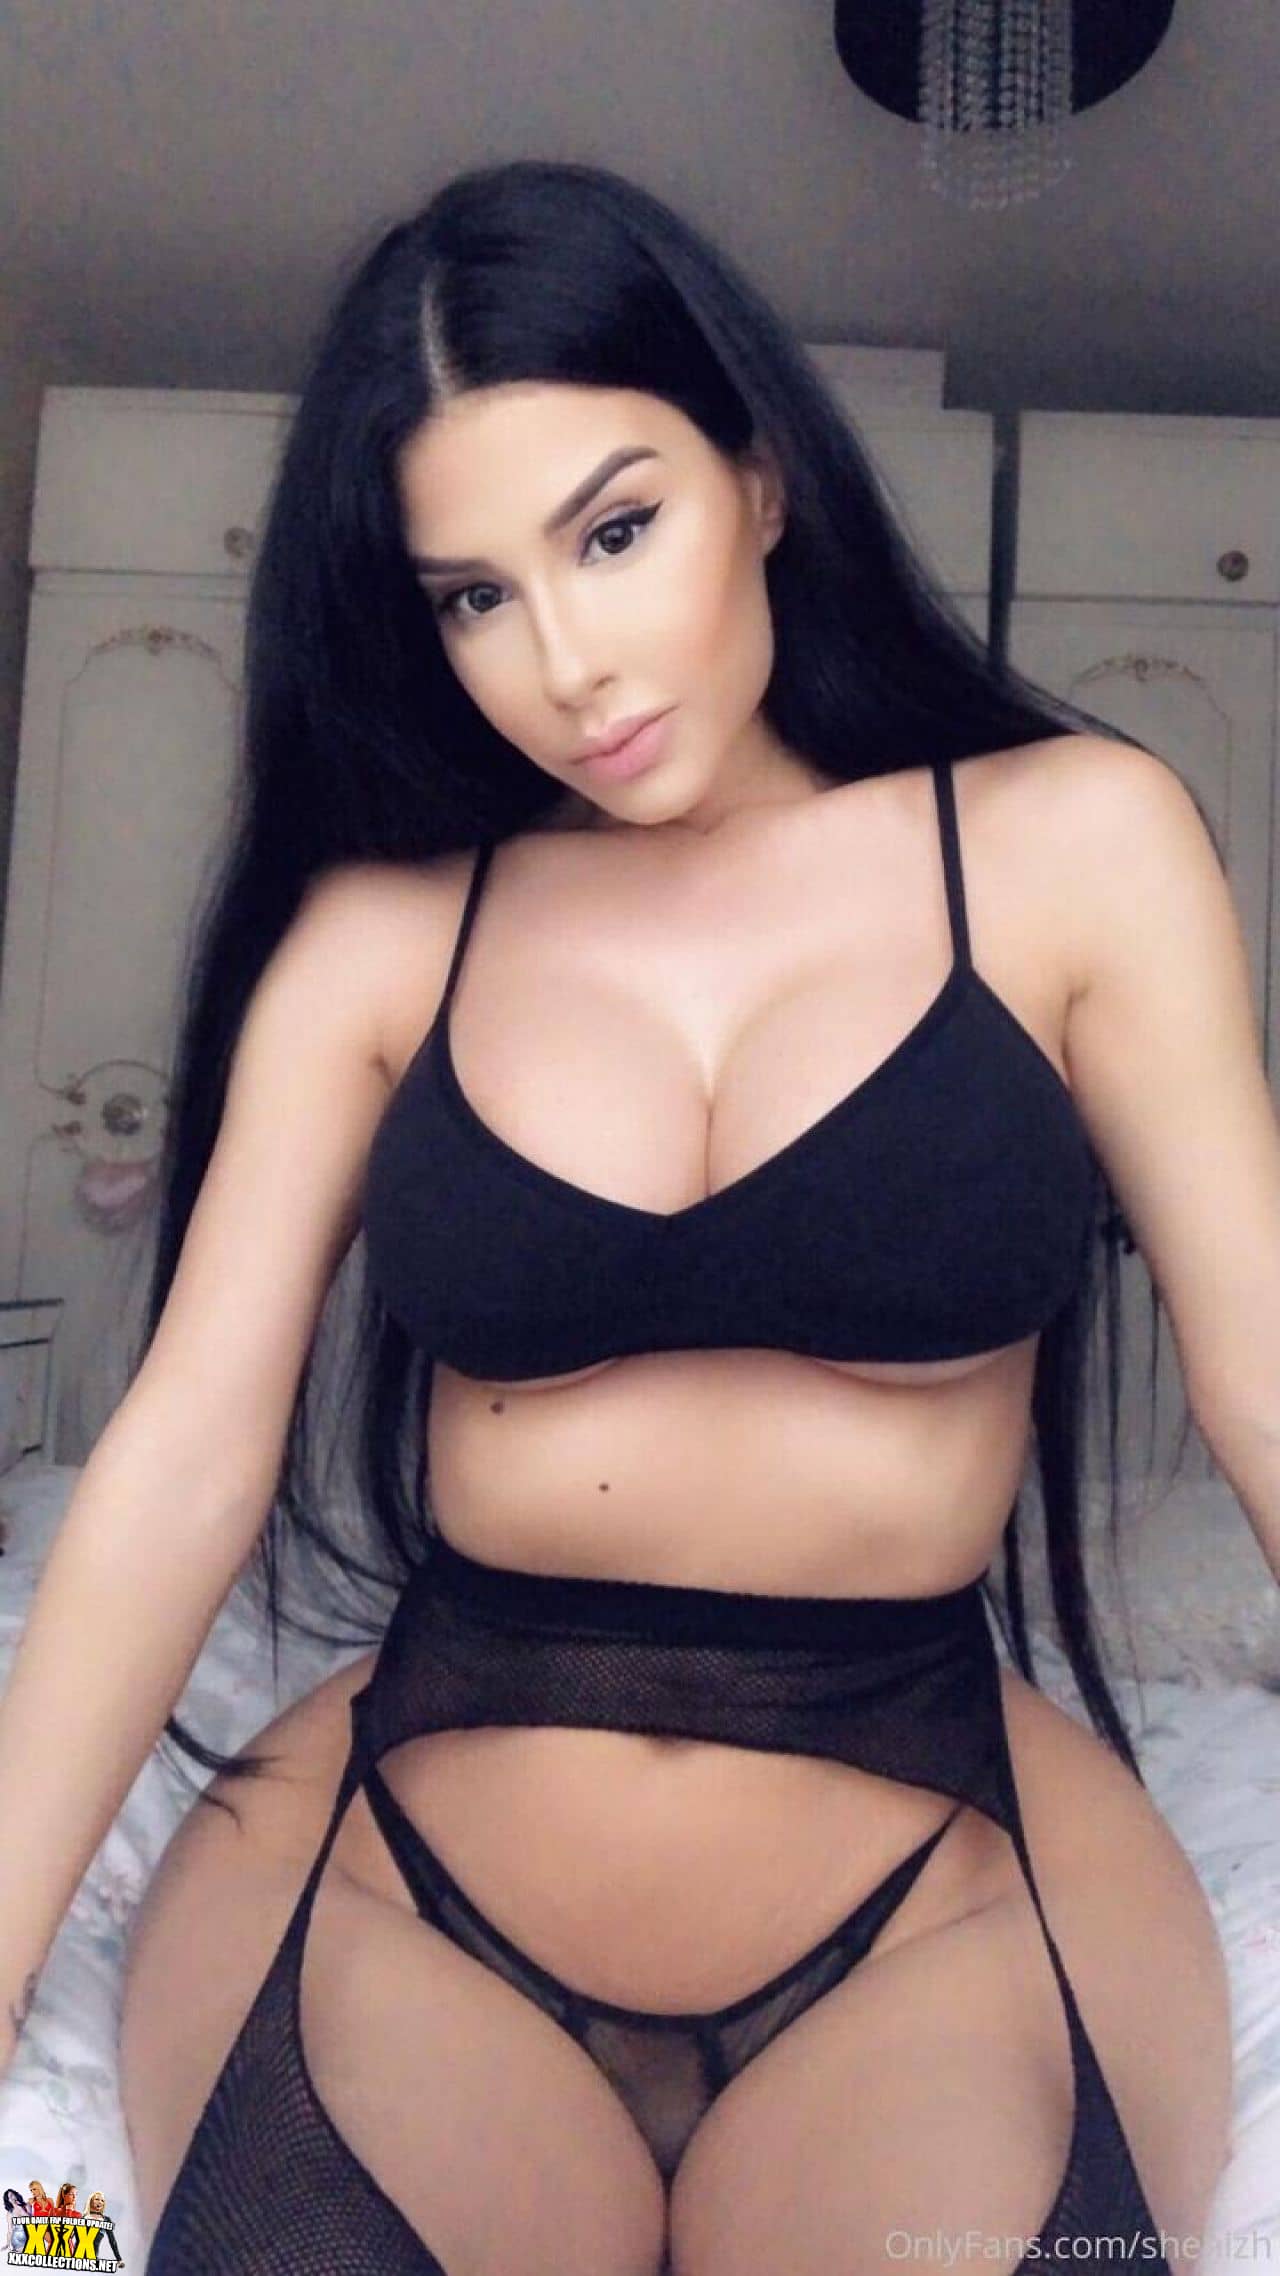 shenizh onlyfans pictures complete siterip